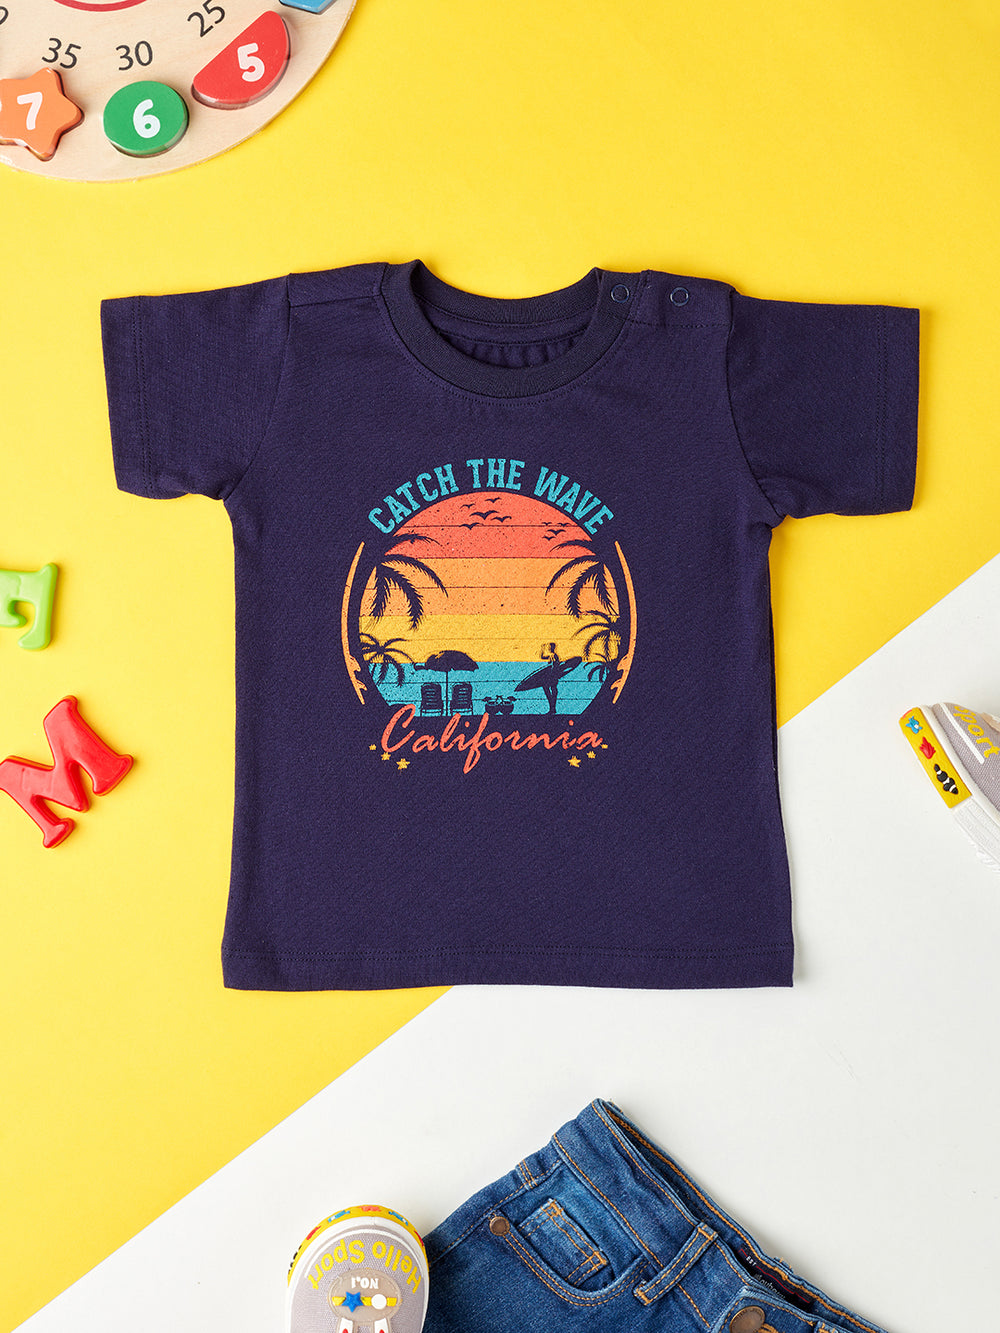 Boys Round Neck T-Shirts Half Sleeve - Navy Blue with Colorful Print